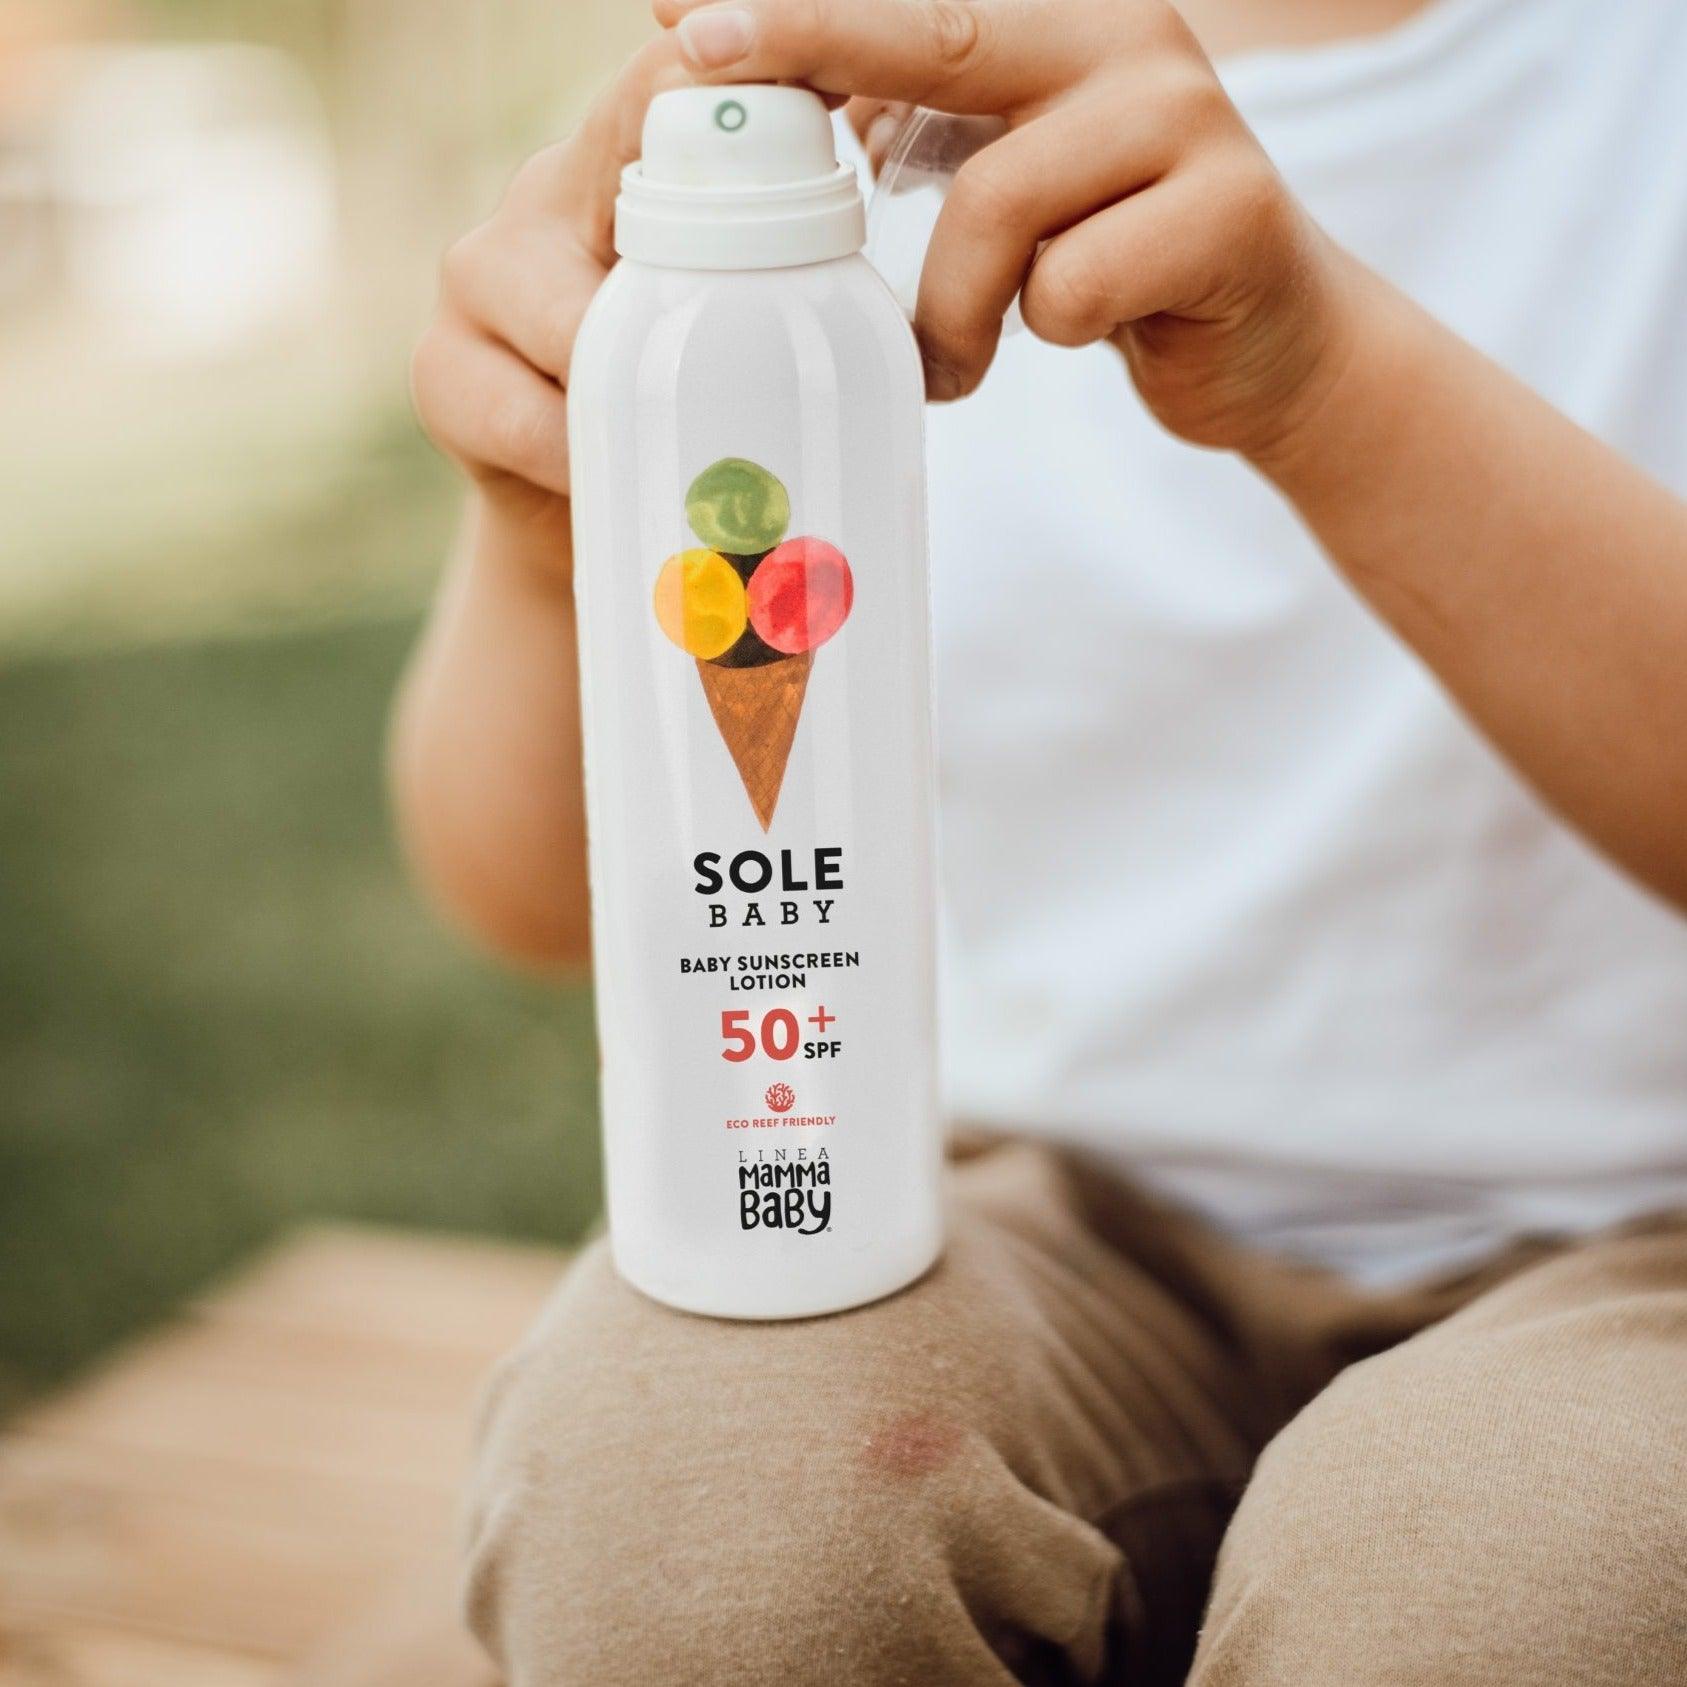 LINEA MAMMABABY: SOLE BABLE ECO -ECO Reef Lotion SPF 50+